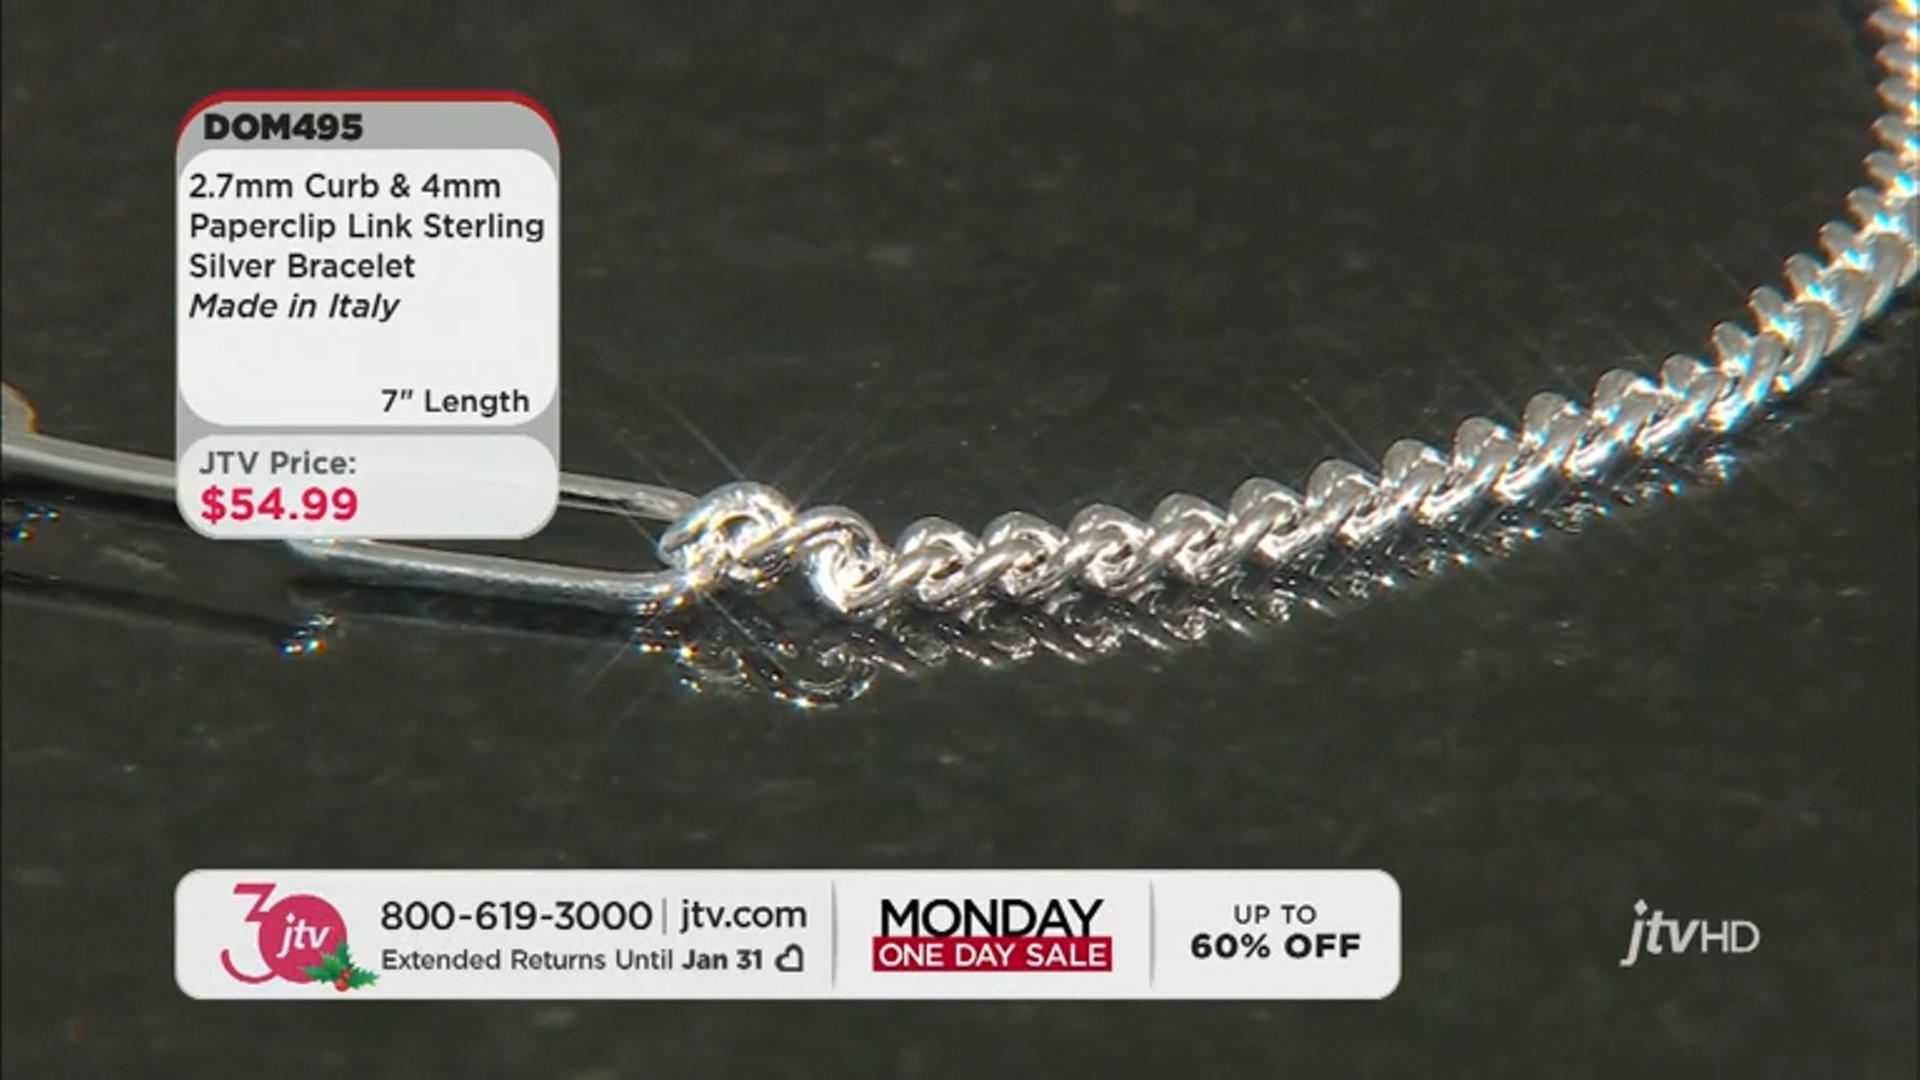 Sterling Silver 2.7mm Curb & 4mm Paperclip Link Bracelet Video Thumbnail